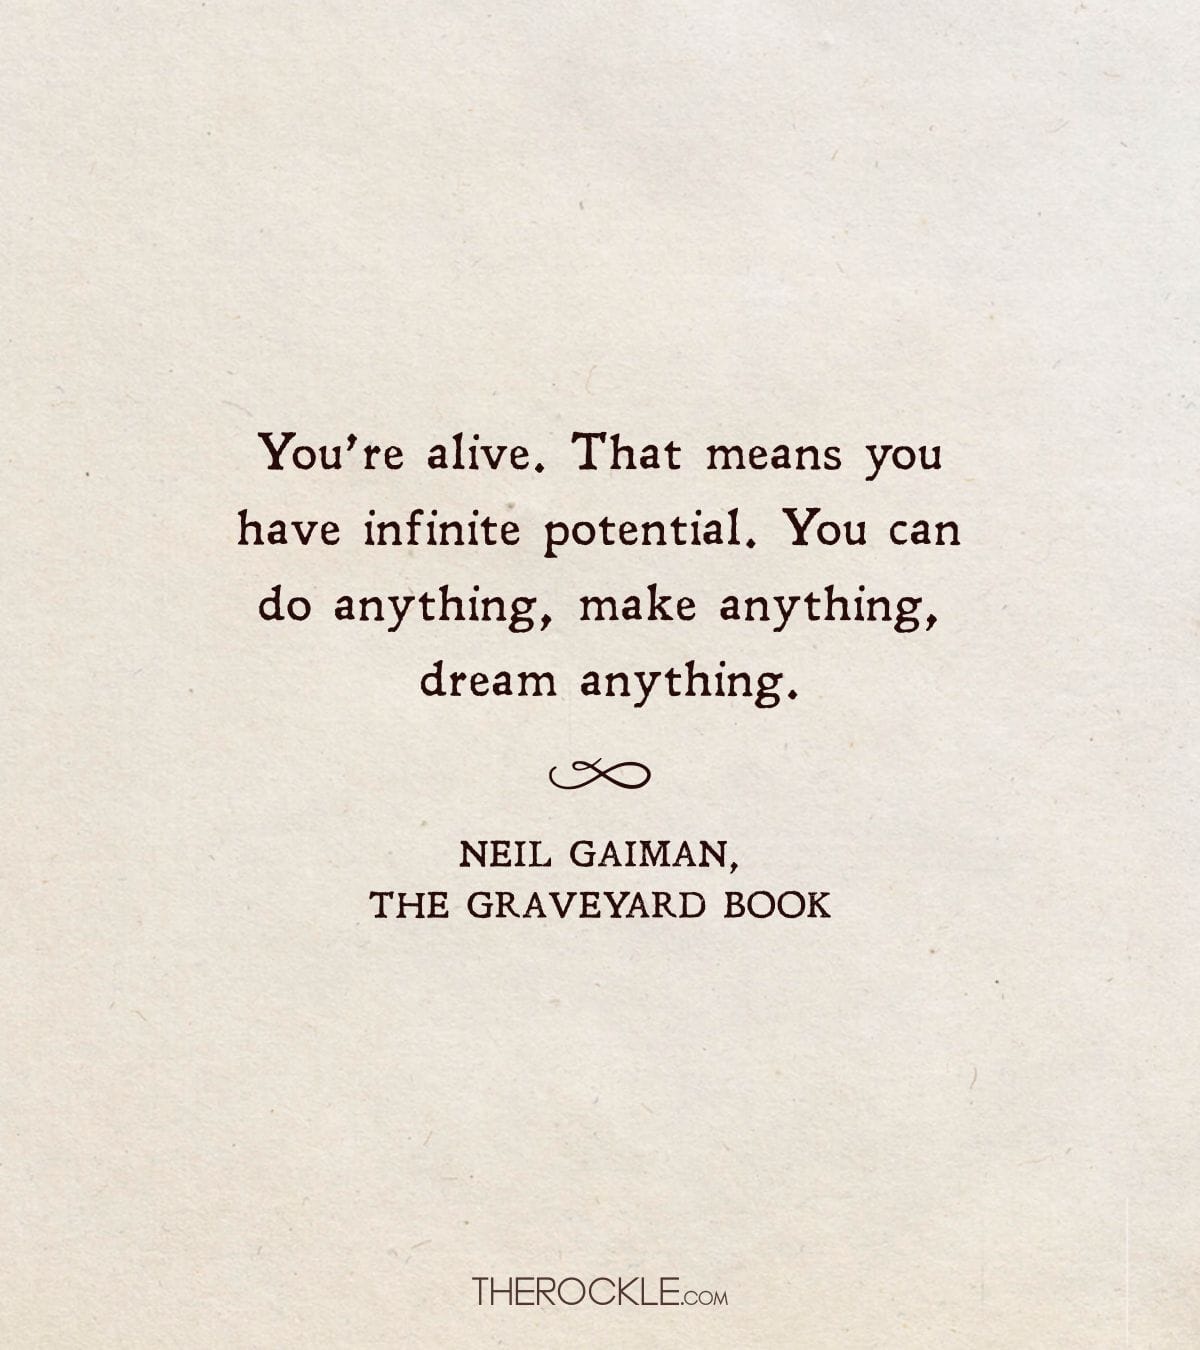 Neil Gaiman's quote on potential in life